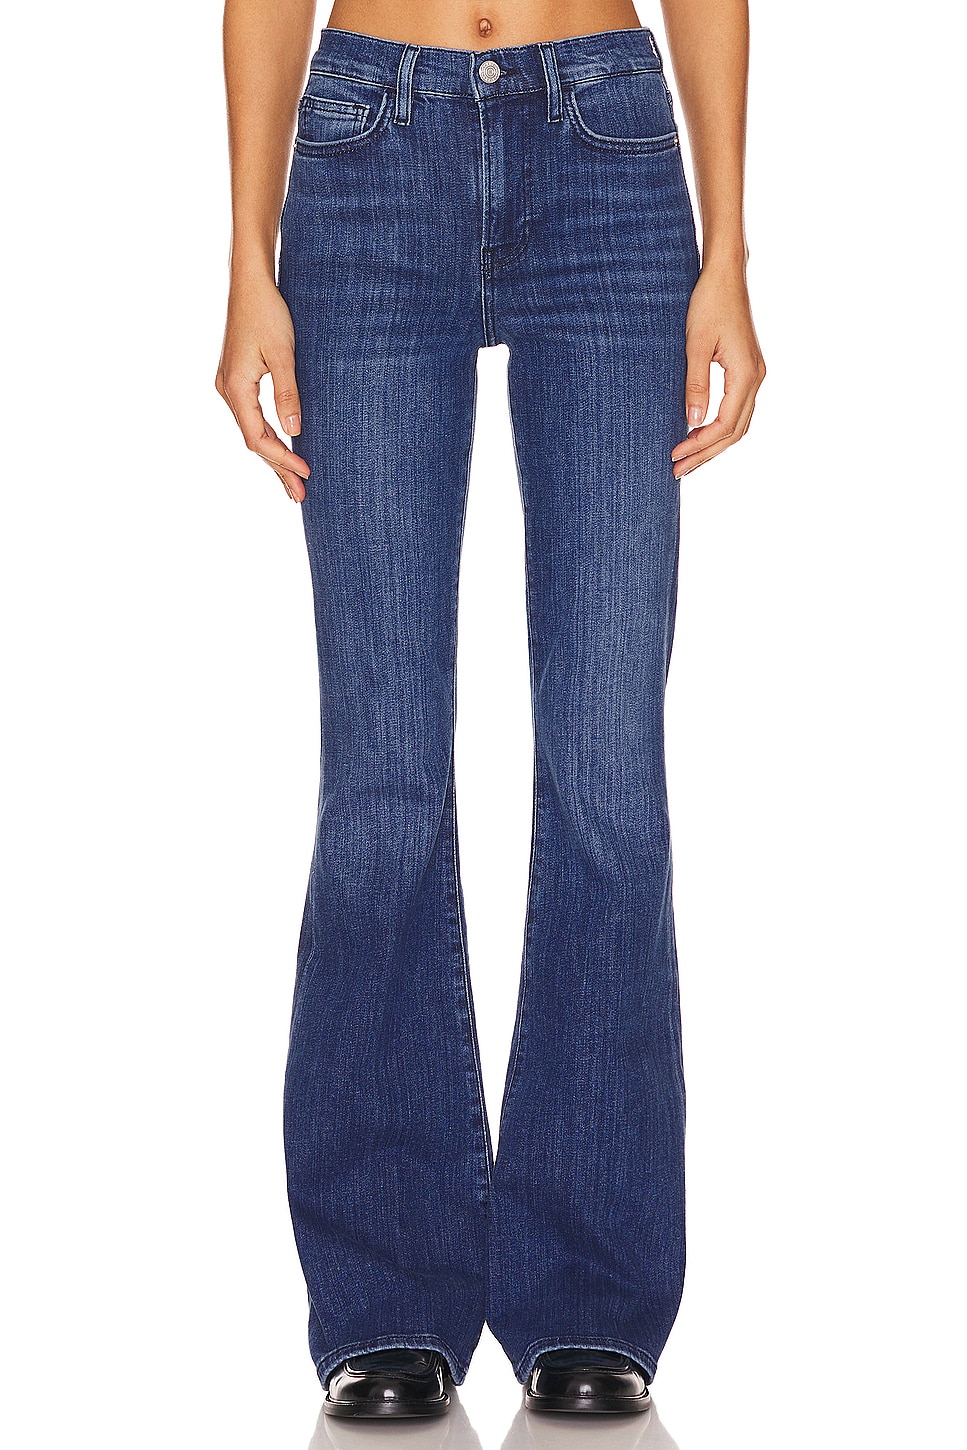 SPANX Flare Jeans With Patch Pockets in Authentic Blue